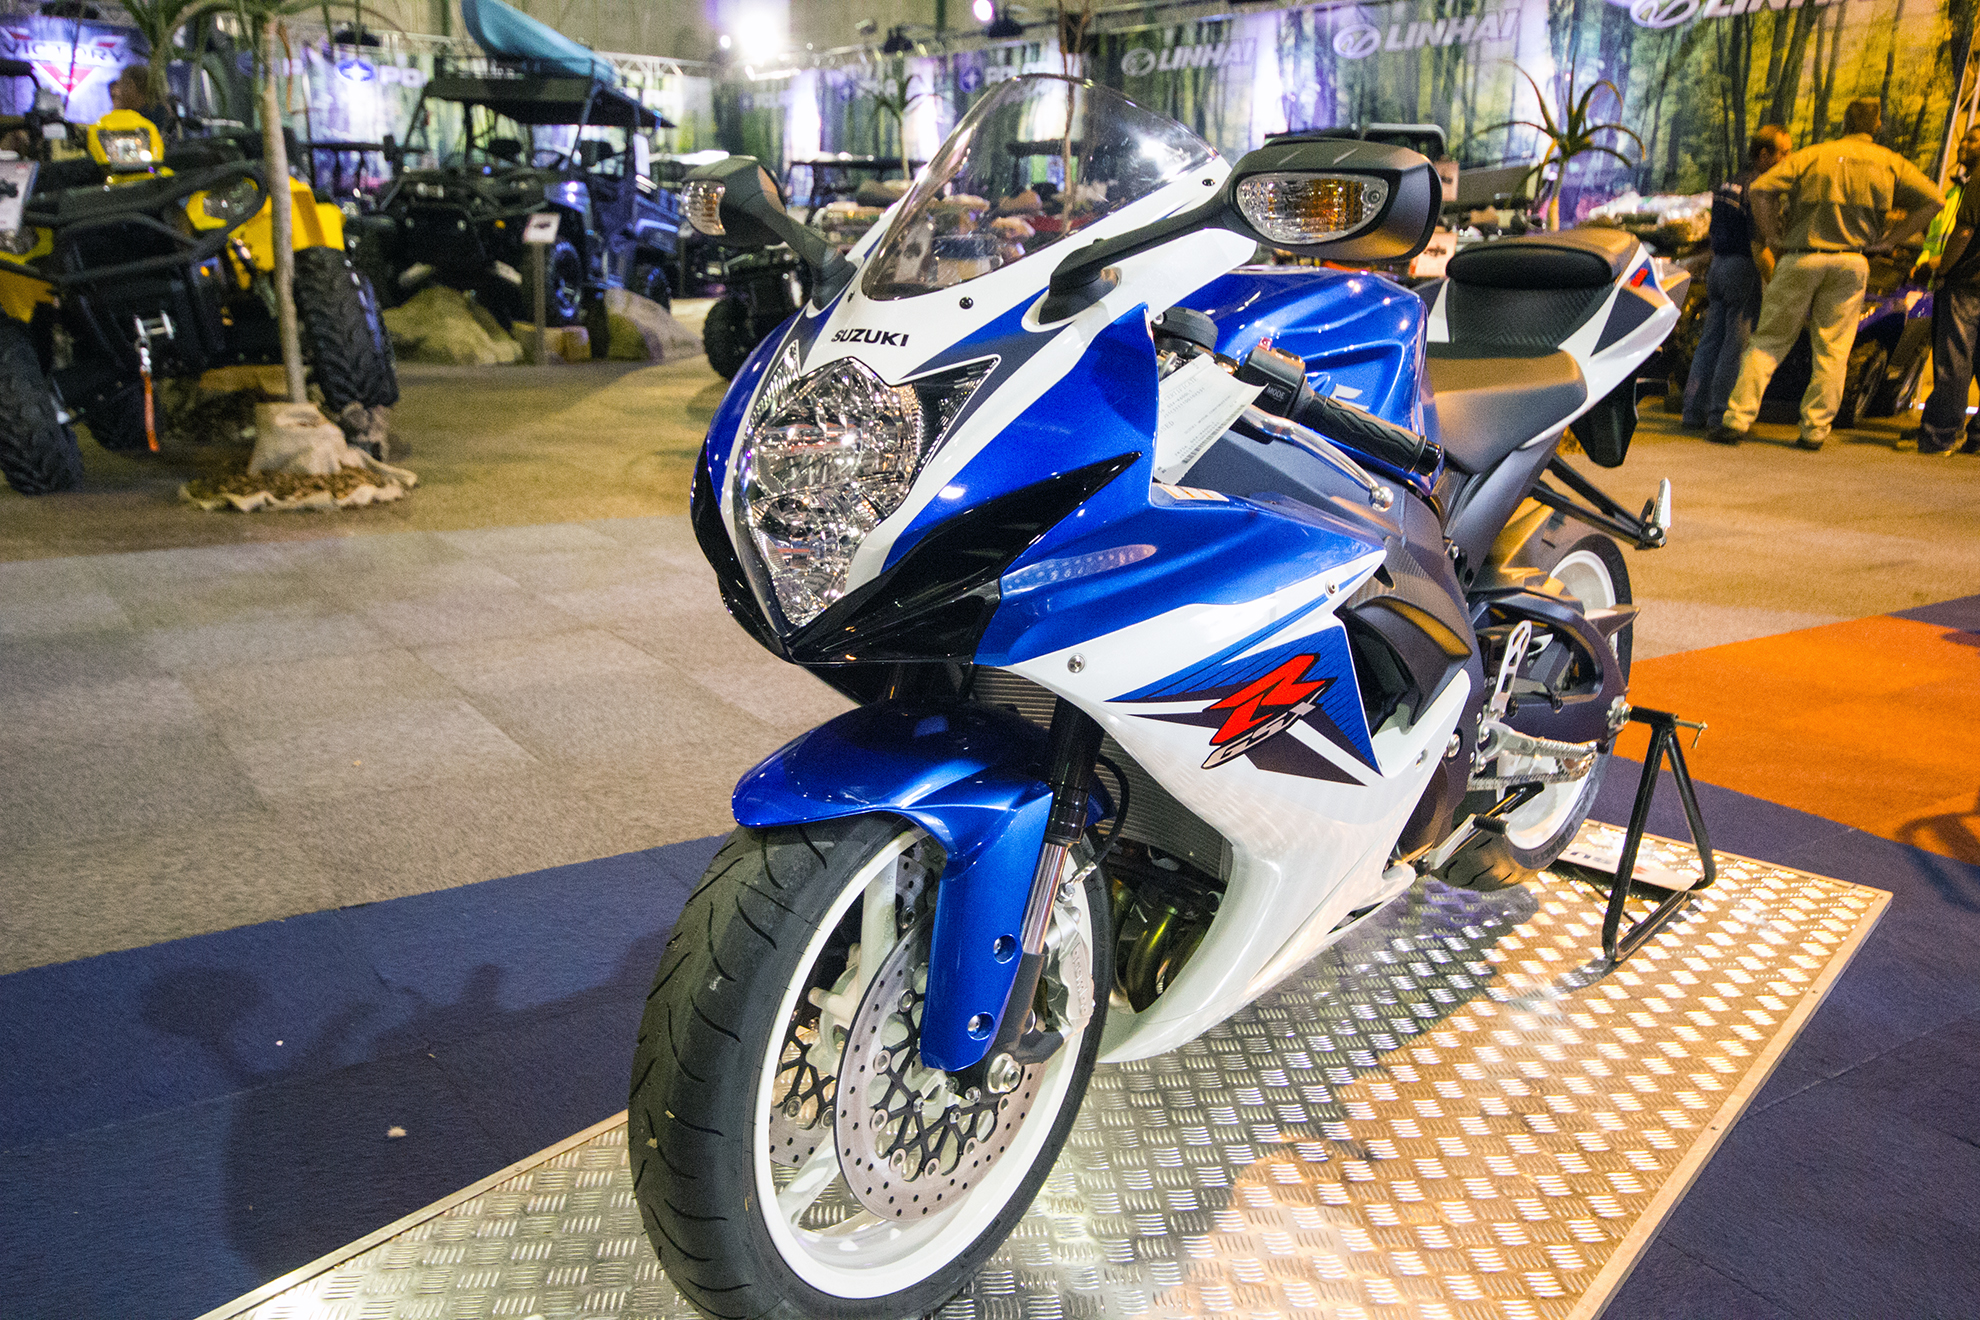 Images: Suzuki at the Johannesburg Motor Cycle Show 2012